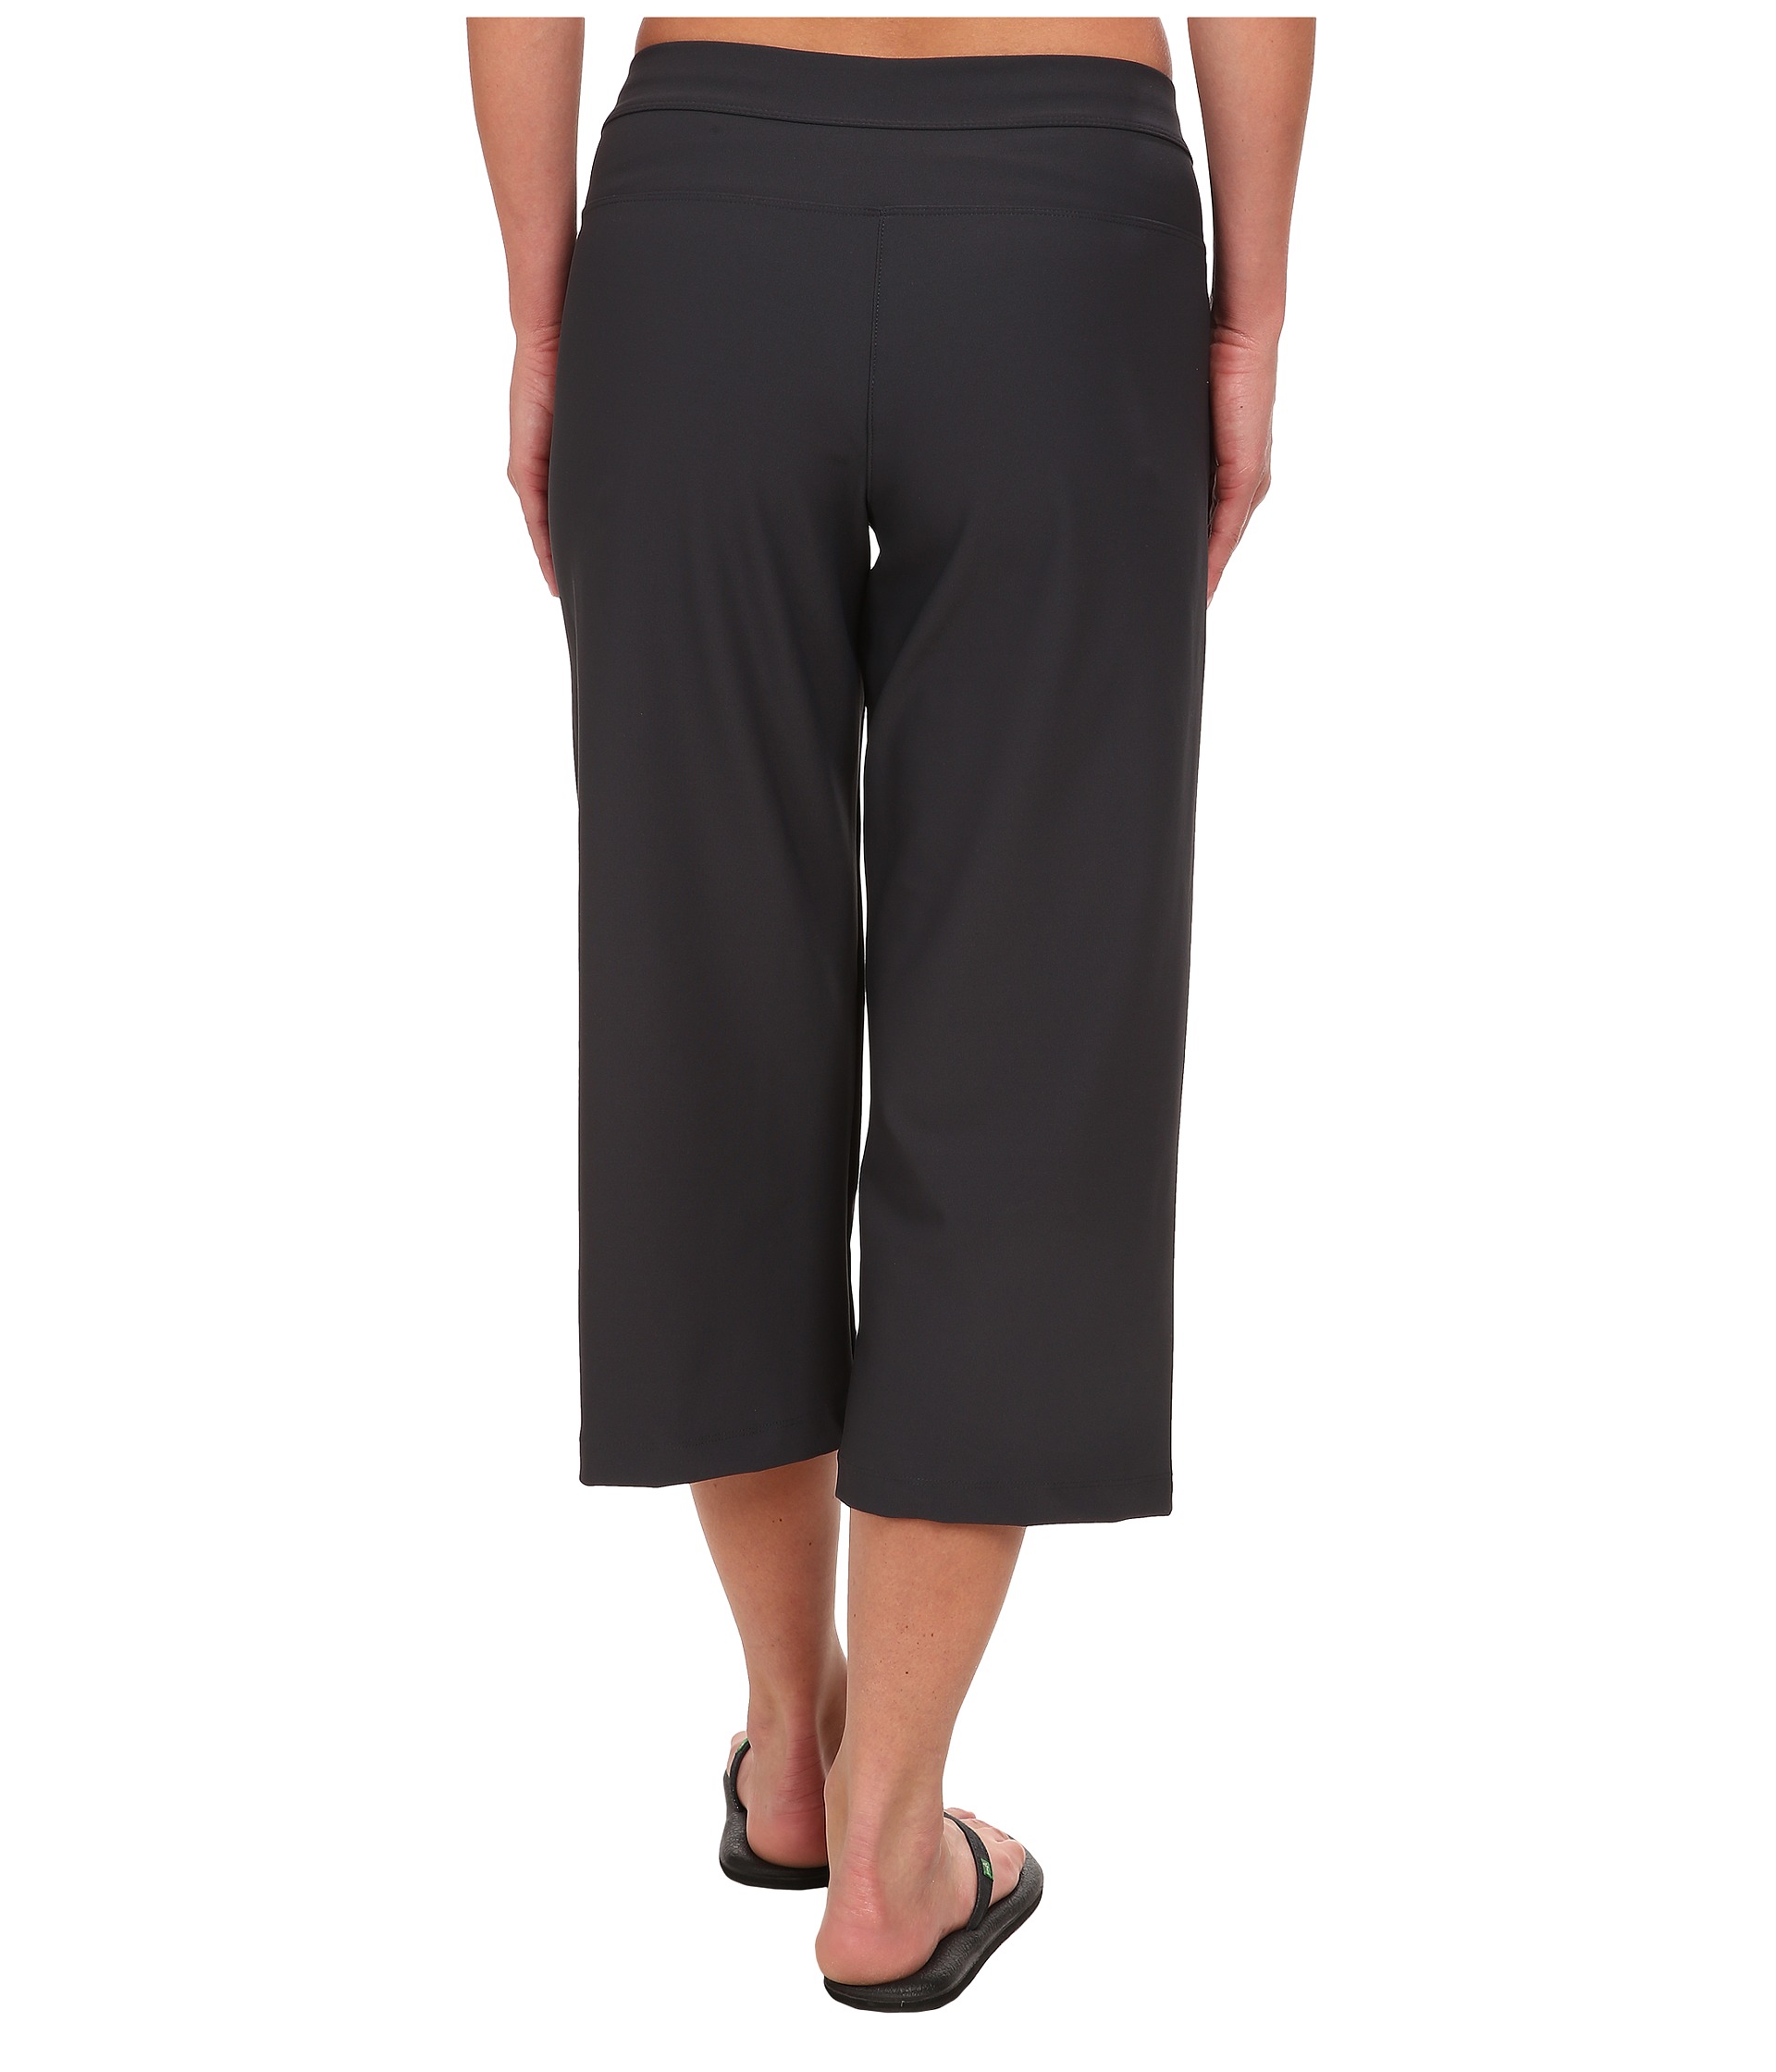 Lucy Everyday Capri Fossil - Zappos.com Free Shipping BOTH Ways